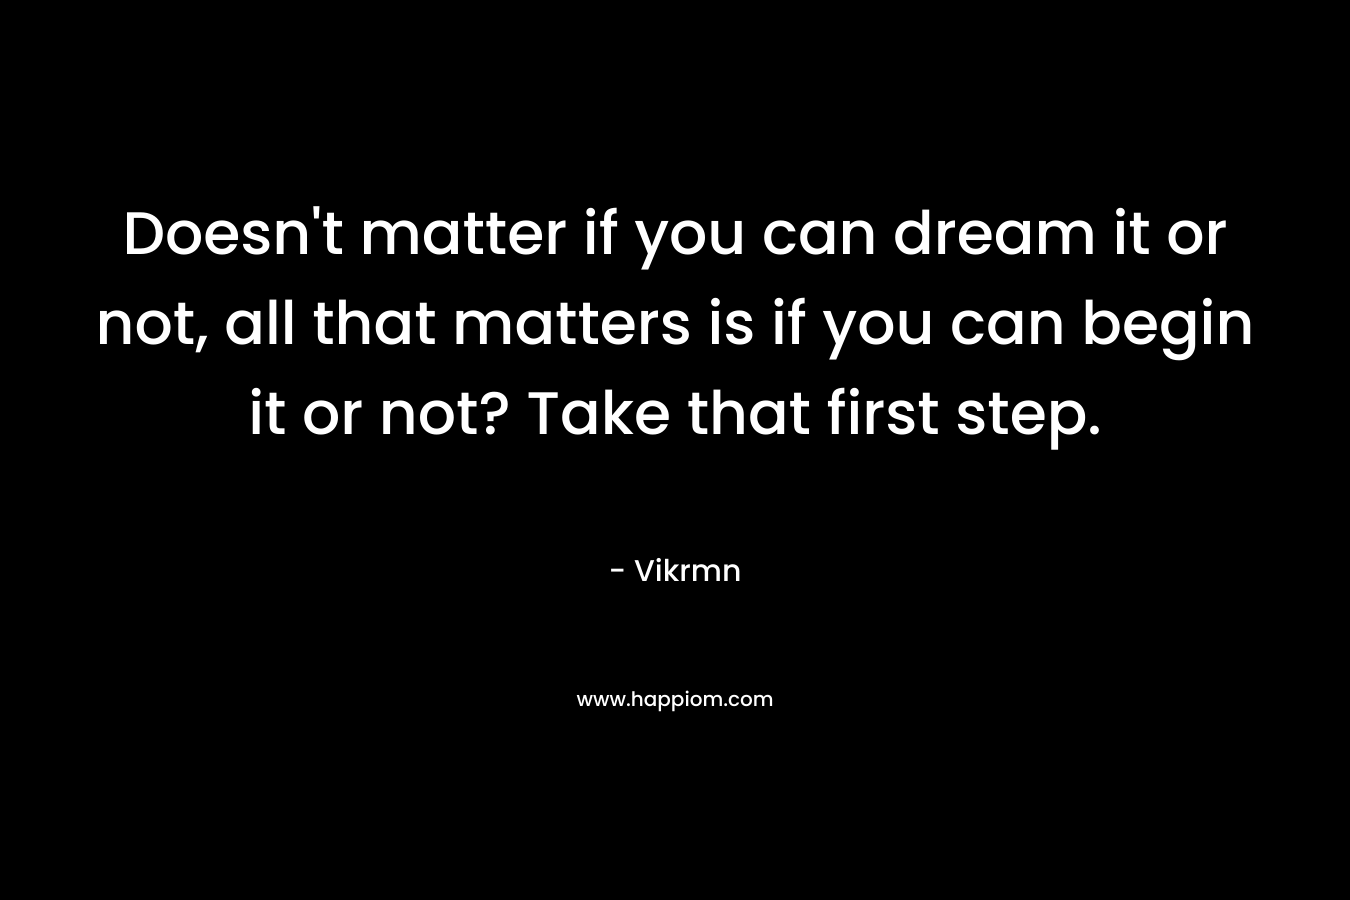 Doesn't matter if you can dream it or not, all that matters is if you can begin it or not? Take that first step.